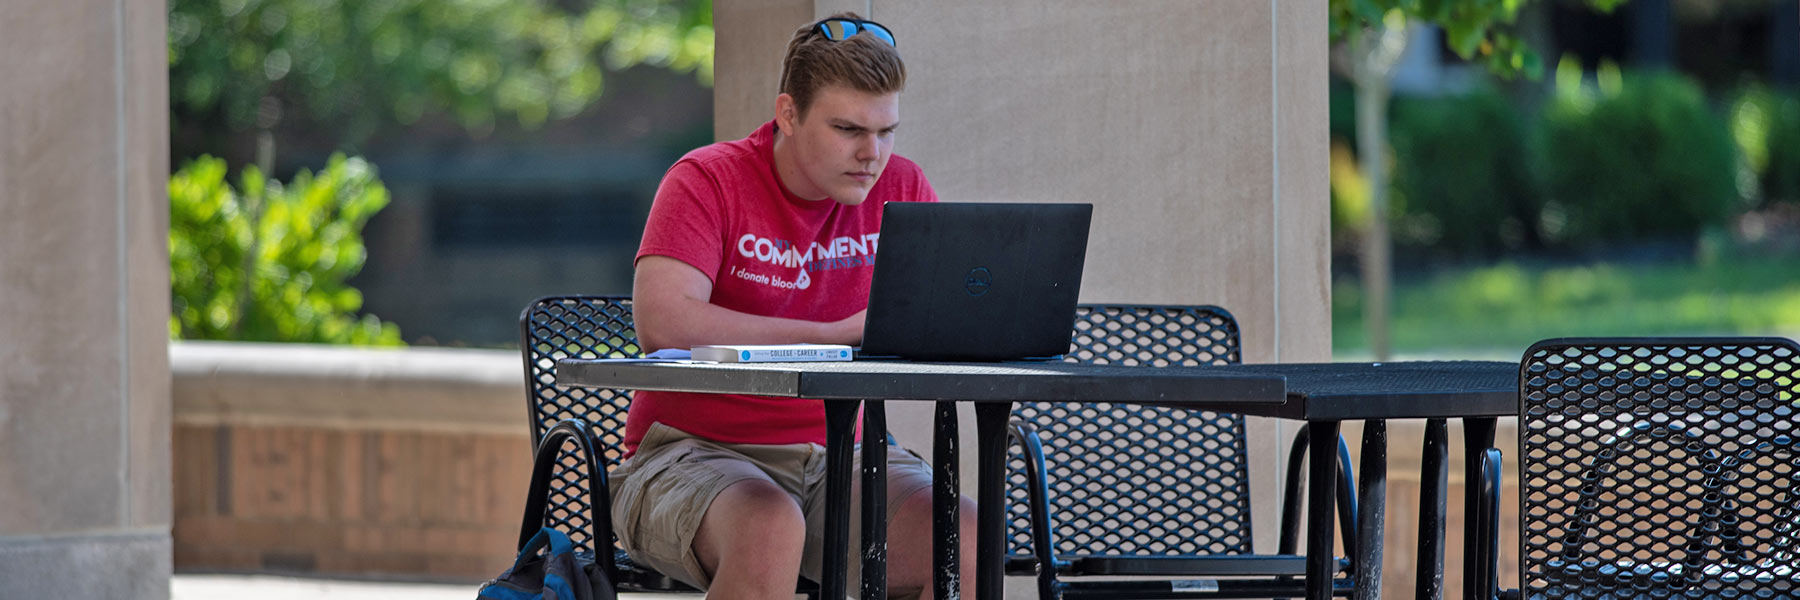 Student completing coursework online, seated outdoors and alone while practicing social distancing.